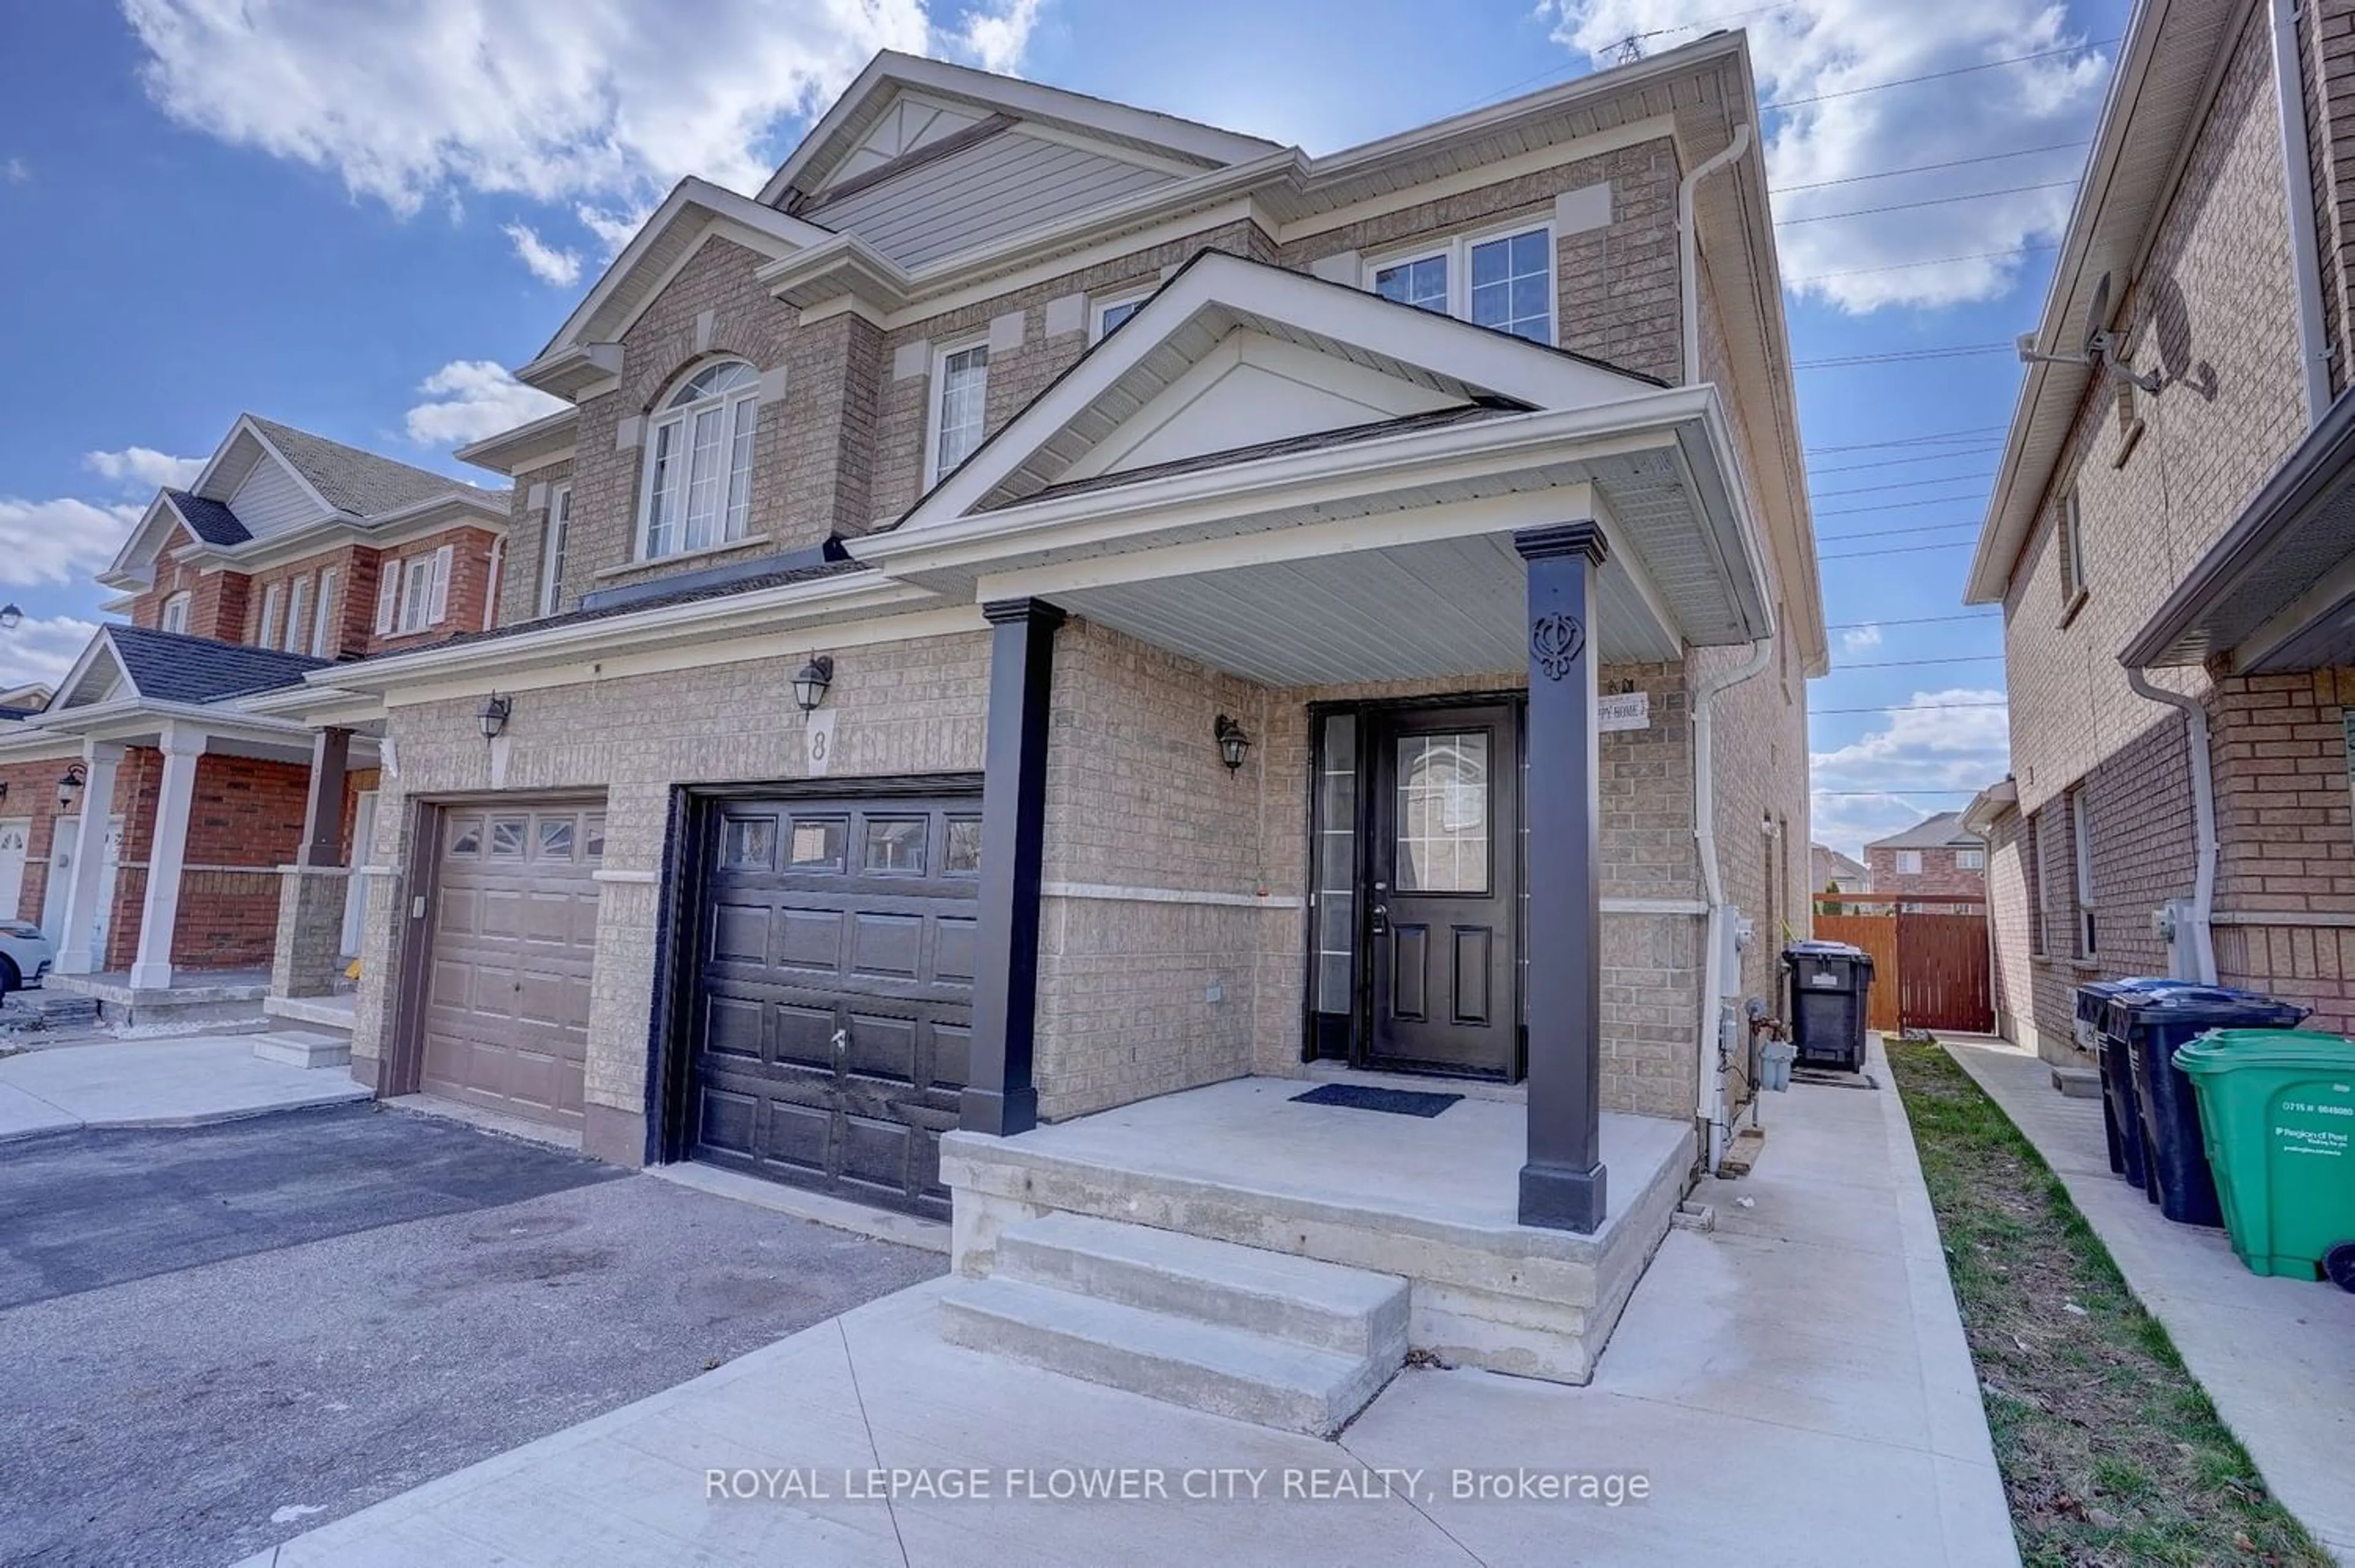 Home with brick exterior material for 8 Wicklow Rd, Brampton Ontario L6X 0J7